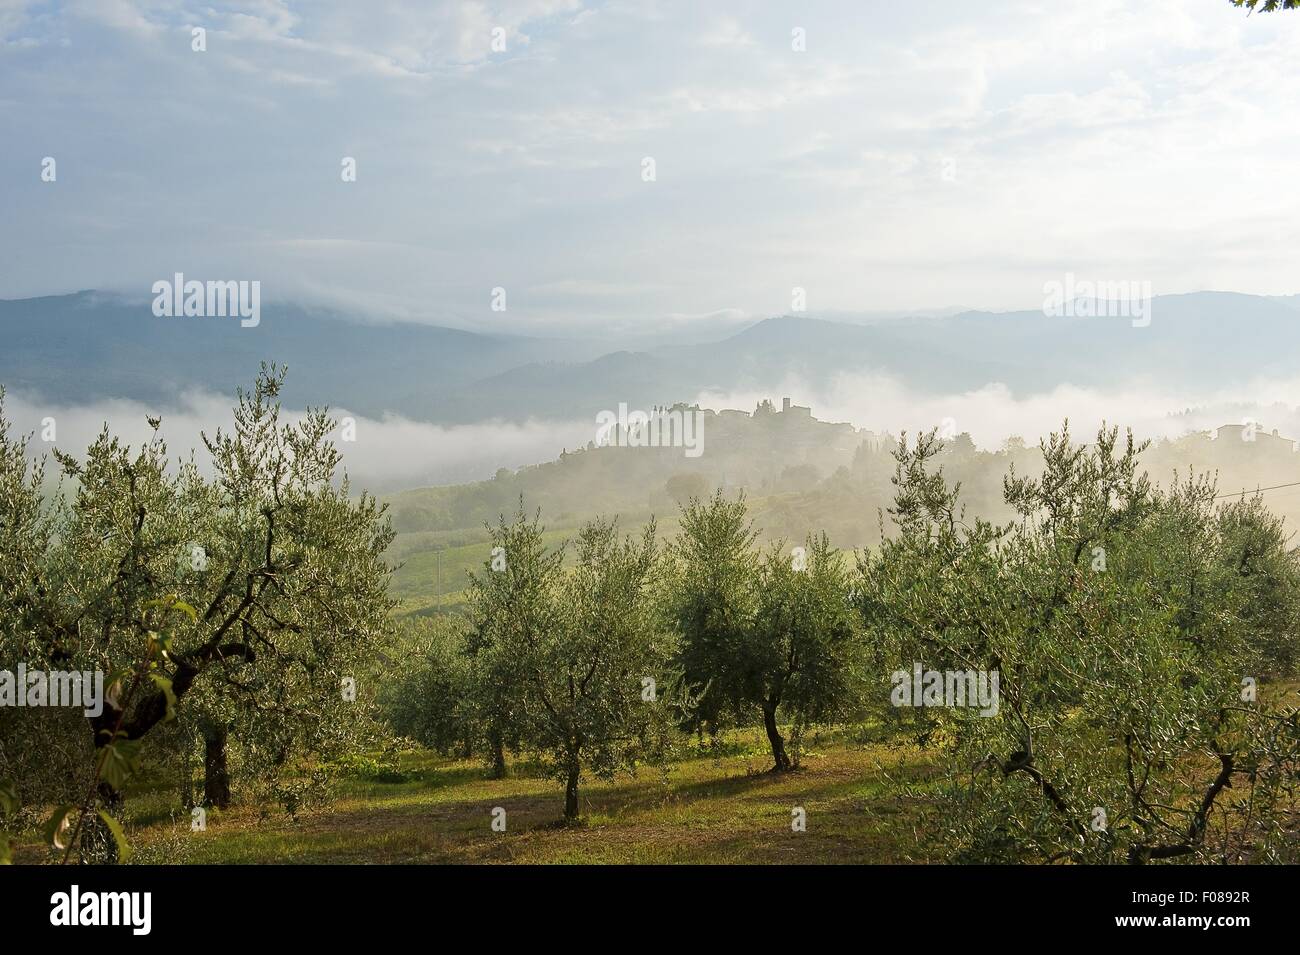 View of olive groves and yards covered with fog at Montefioralle, Tuscany, Italy Stock Photo